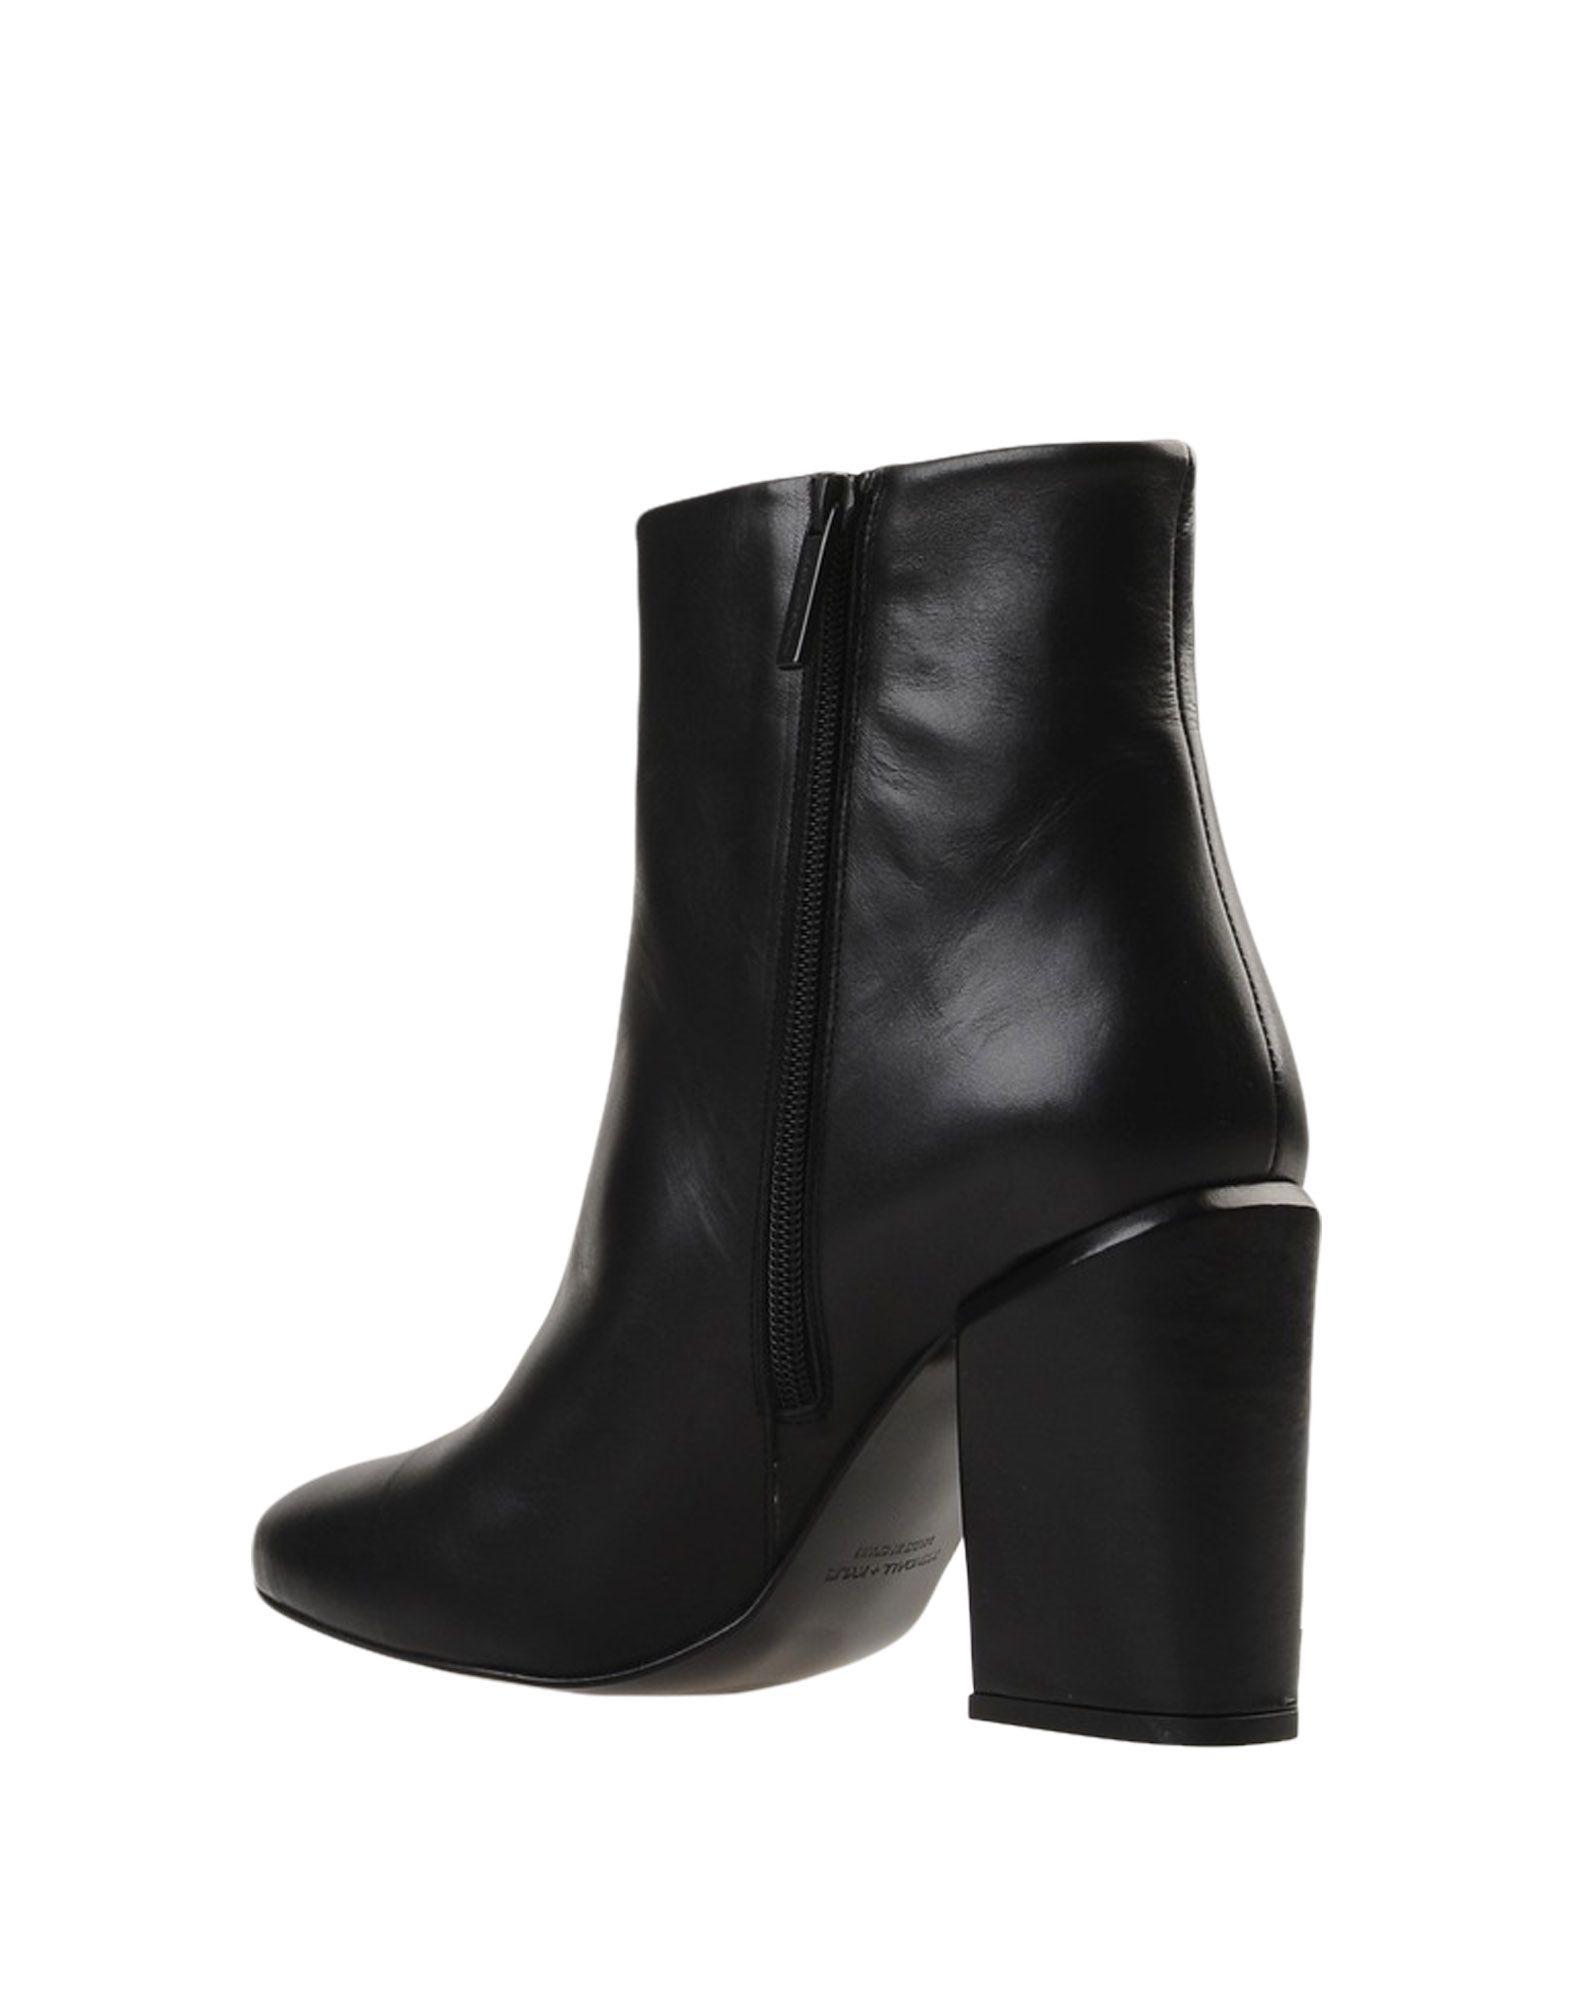 Kendall + Kylie Leather Ankle Boots in Black - Lyst